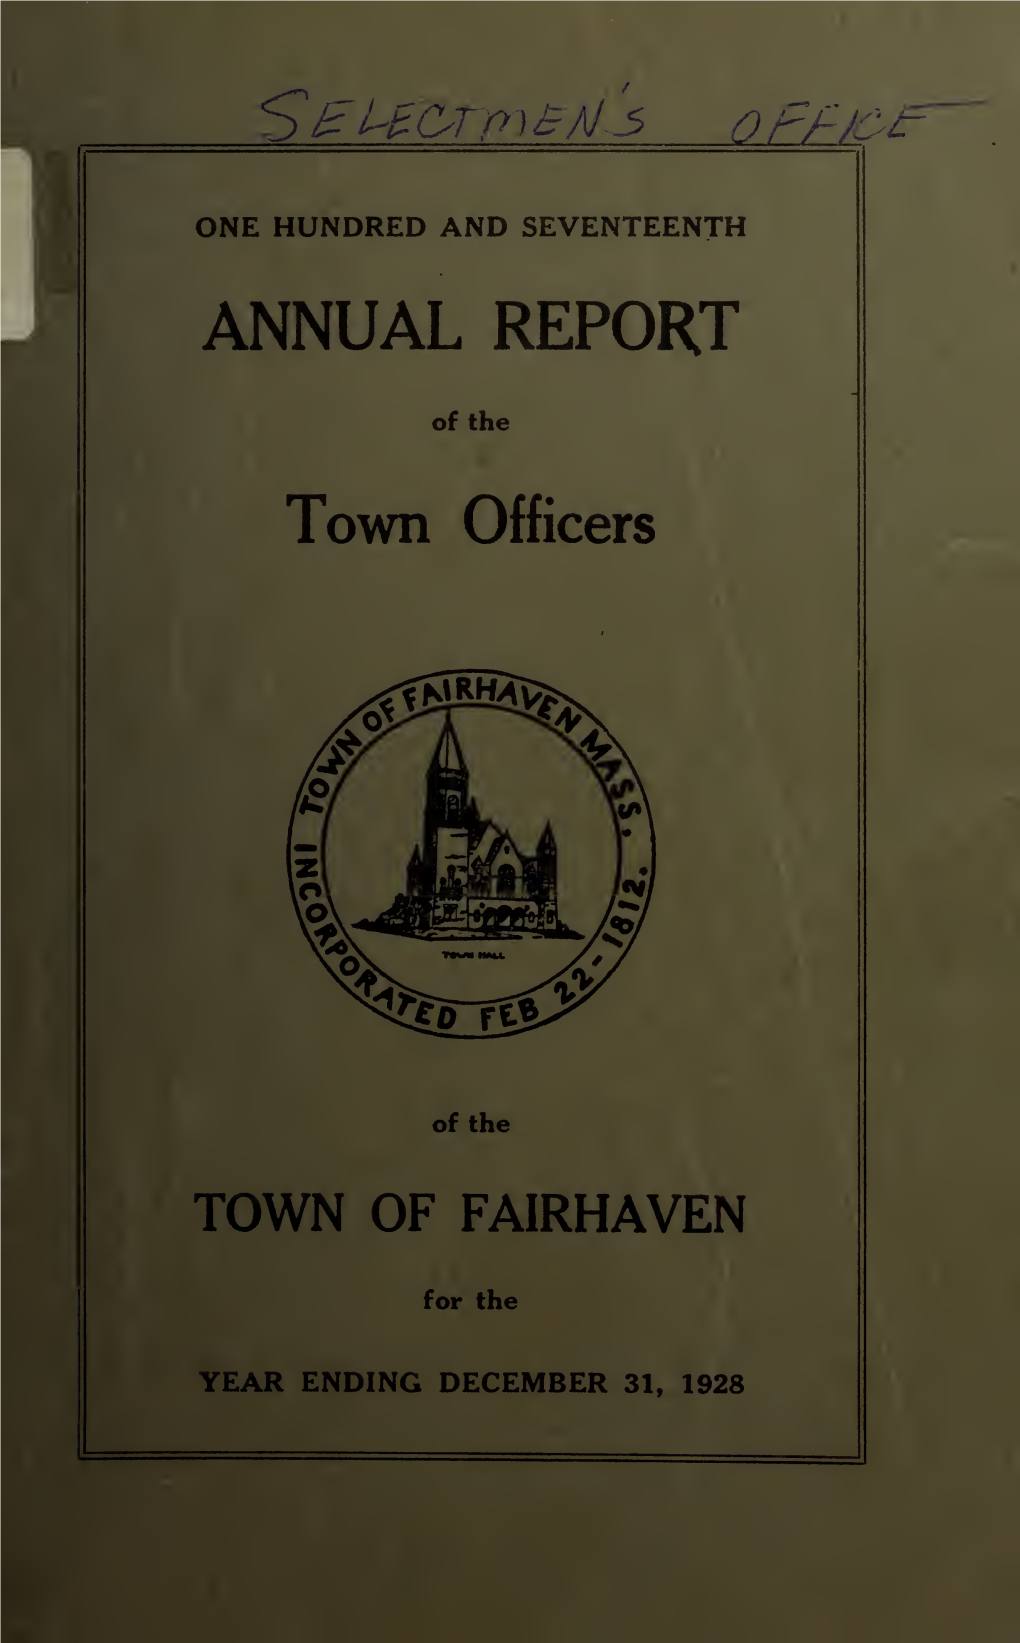 Annual Report of the Town Offices of Fairhaven, Massachusetts